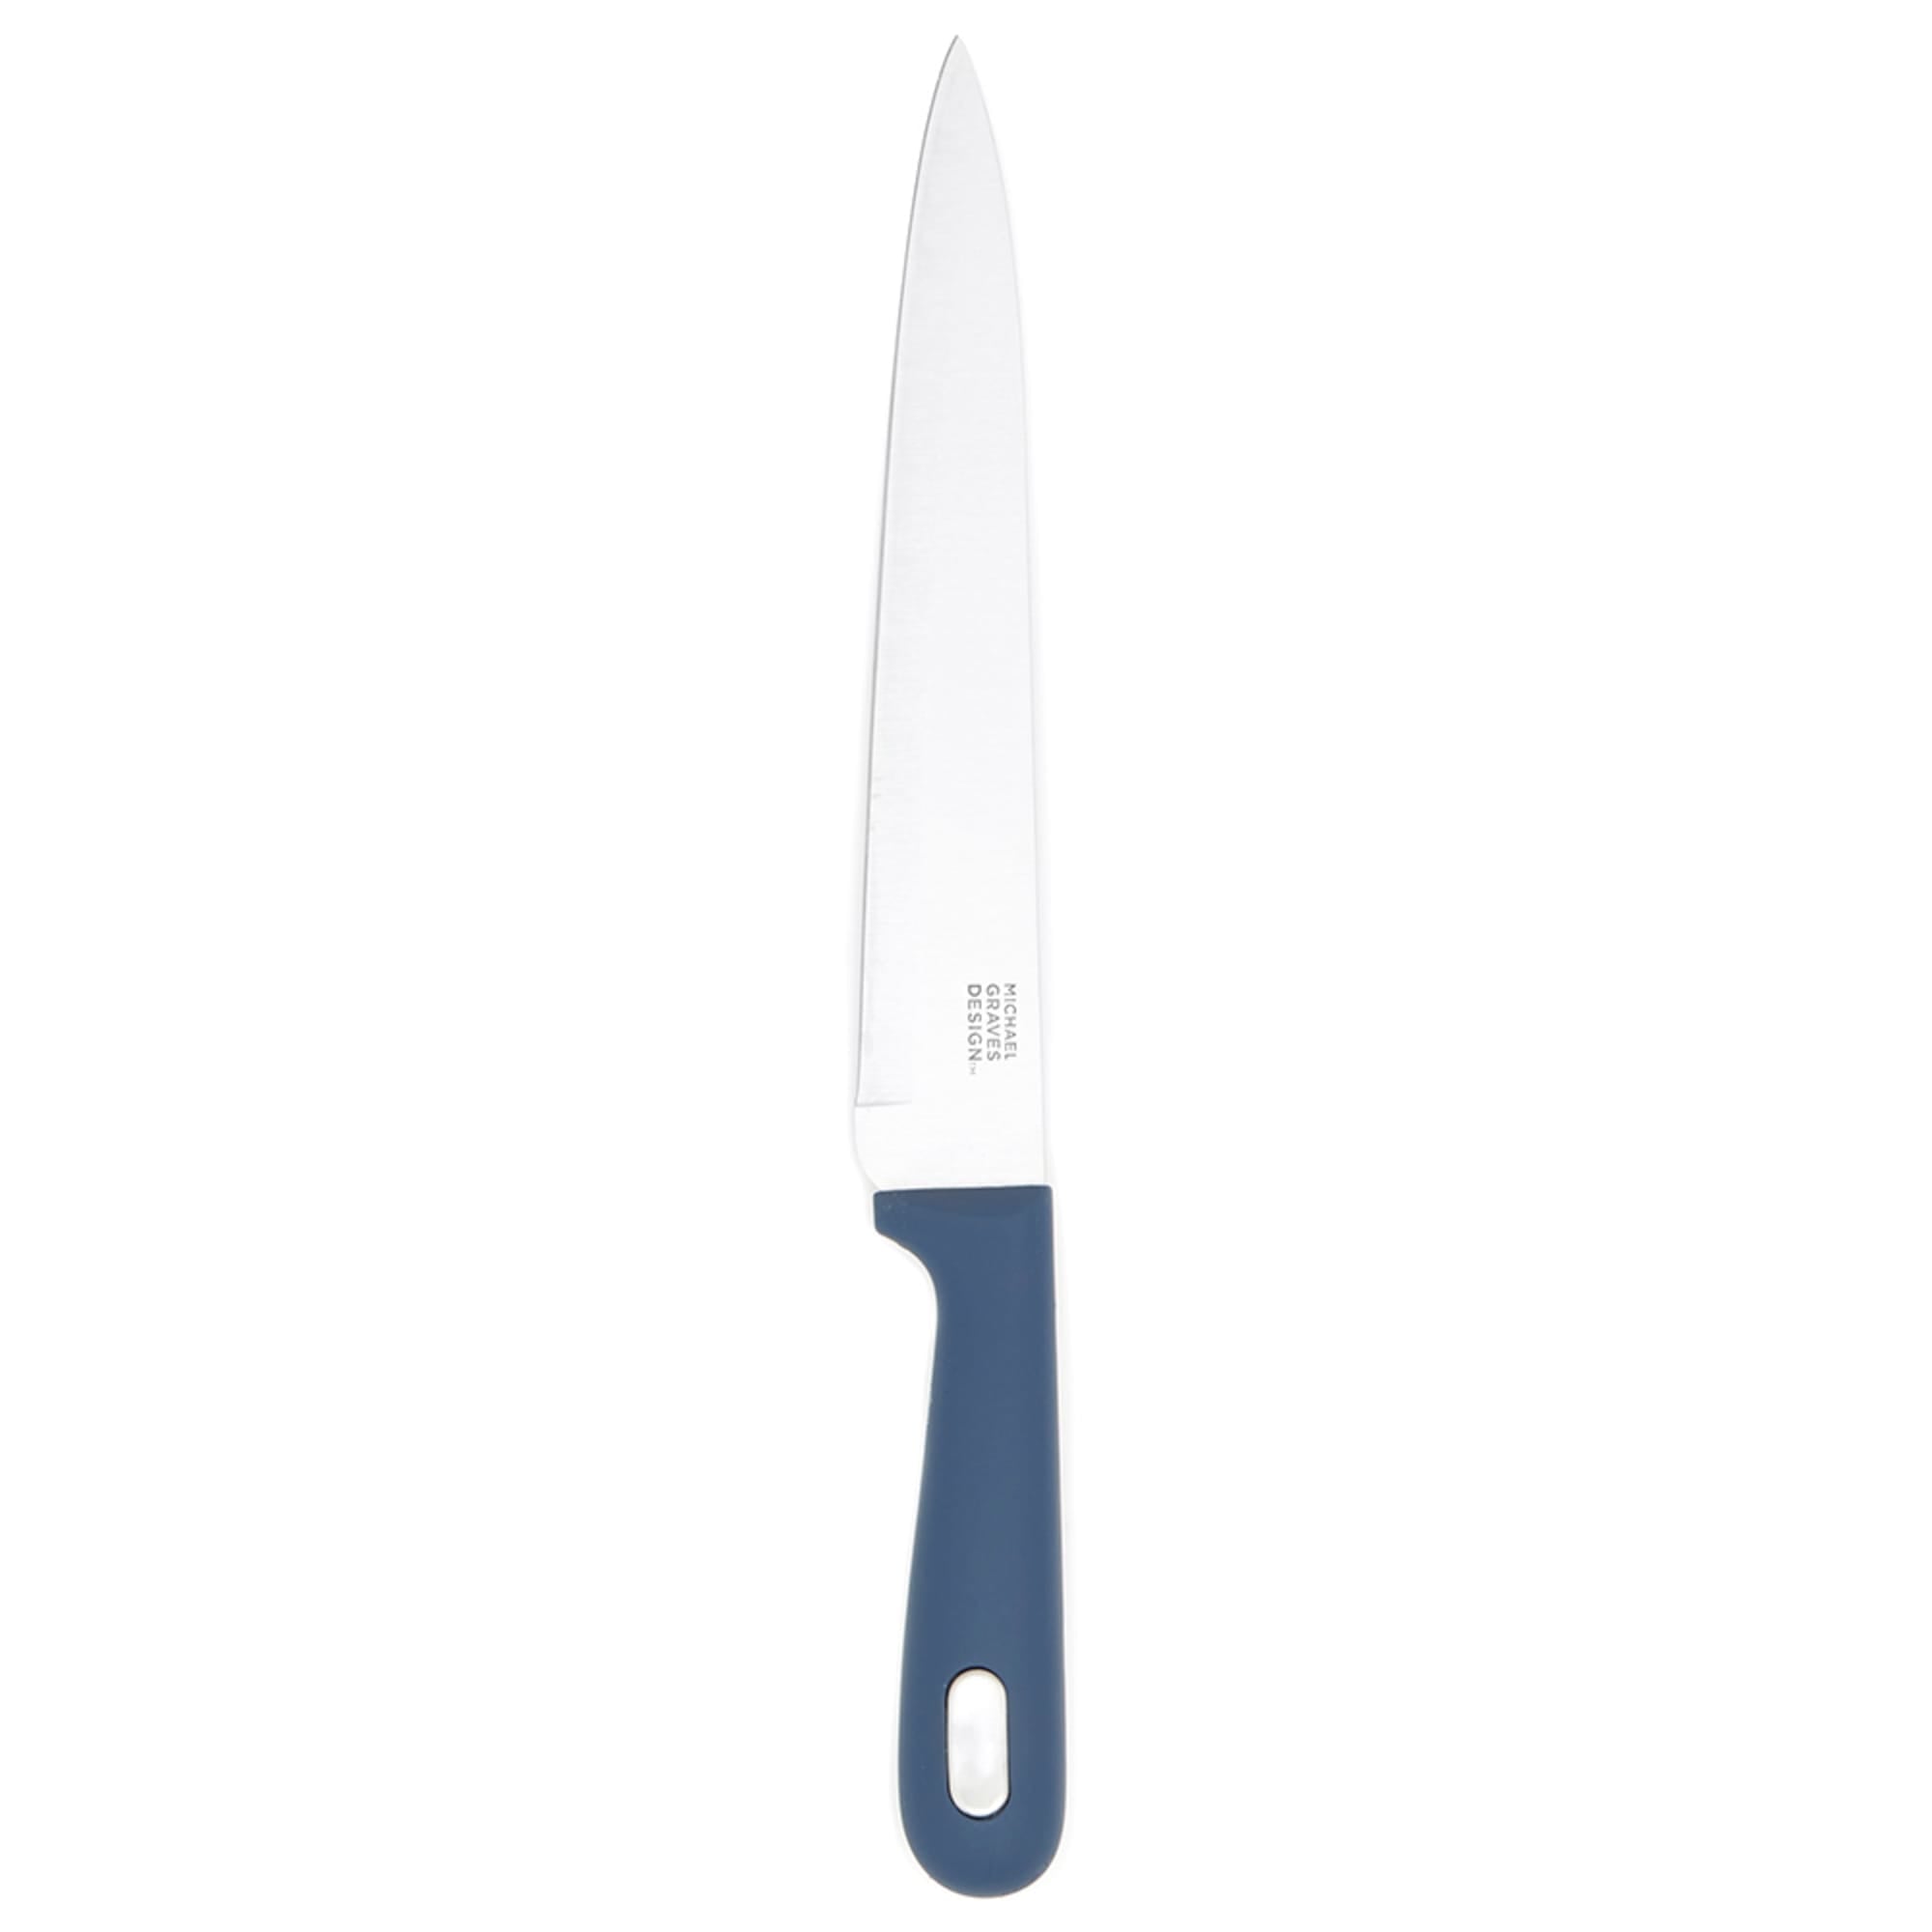 Michael Graves Design Comfortable Grip 8 inch Stainless Steel Slicing Knife, Indigo $3.00 EACH, CASE PACK OF 24